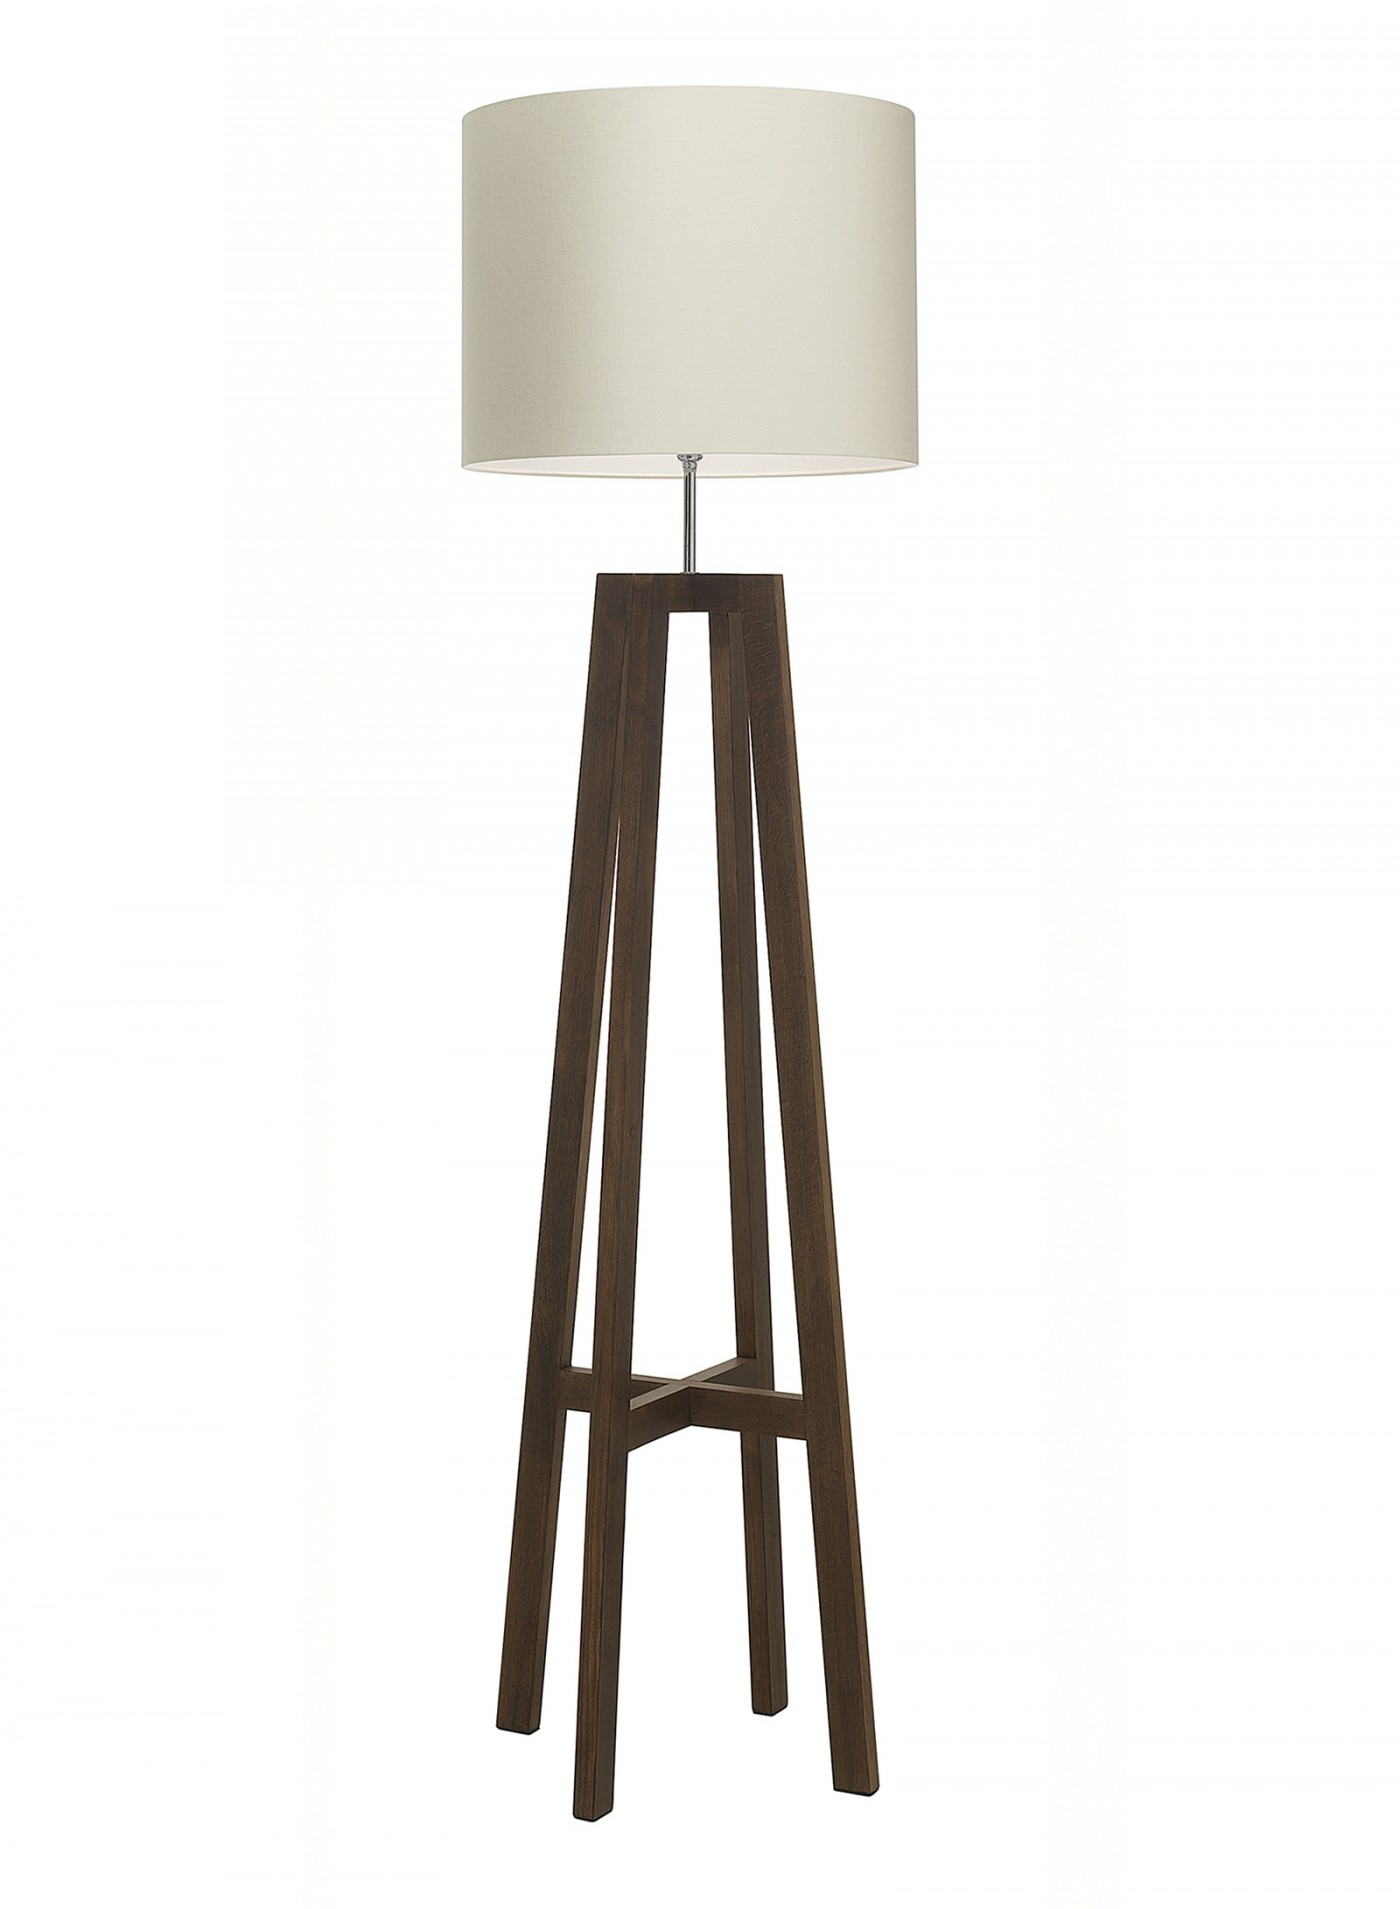 New Wooden Floor Lamp Uk Driftwood With Shade Rustic A throughout dimensions 1400 X 1909